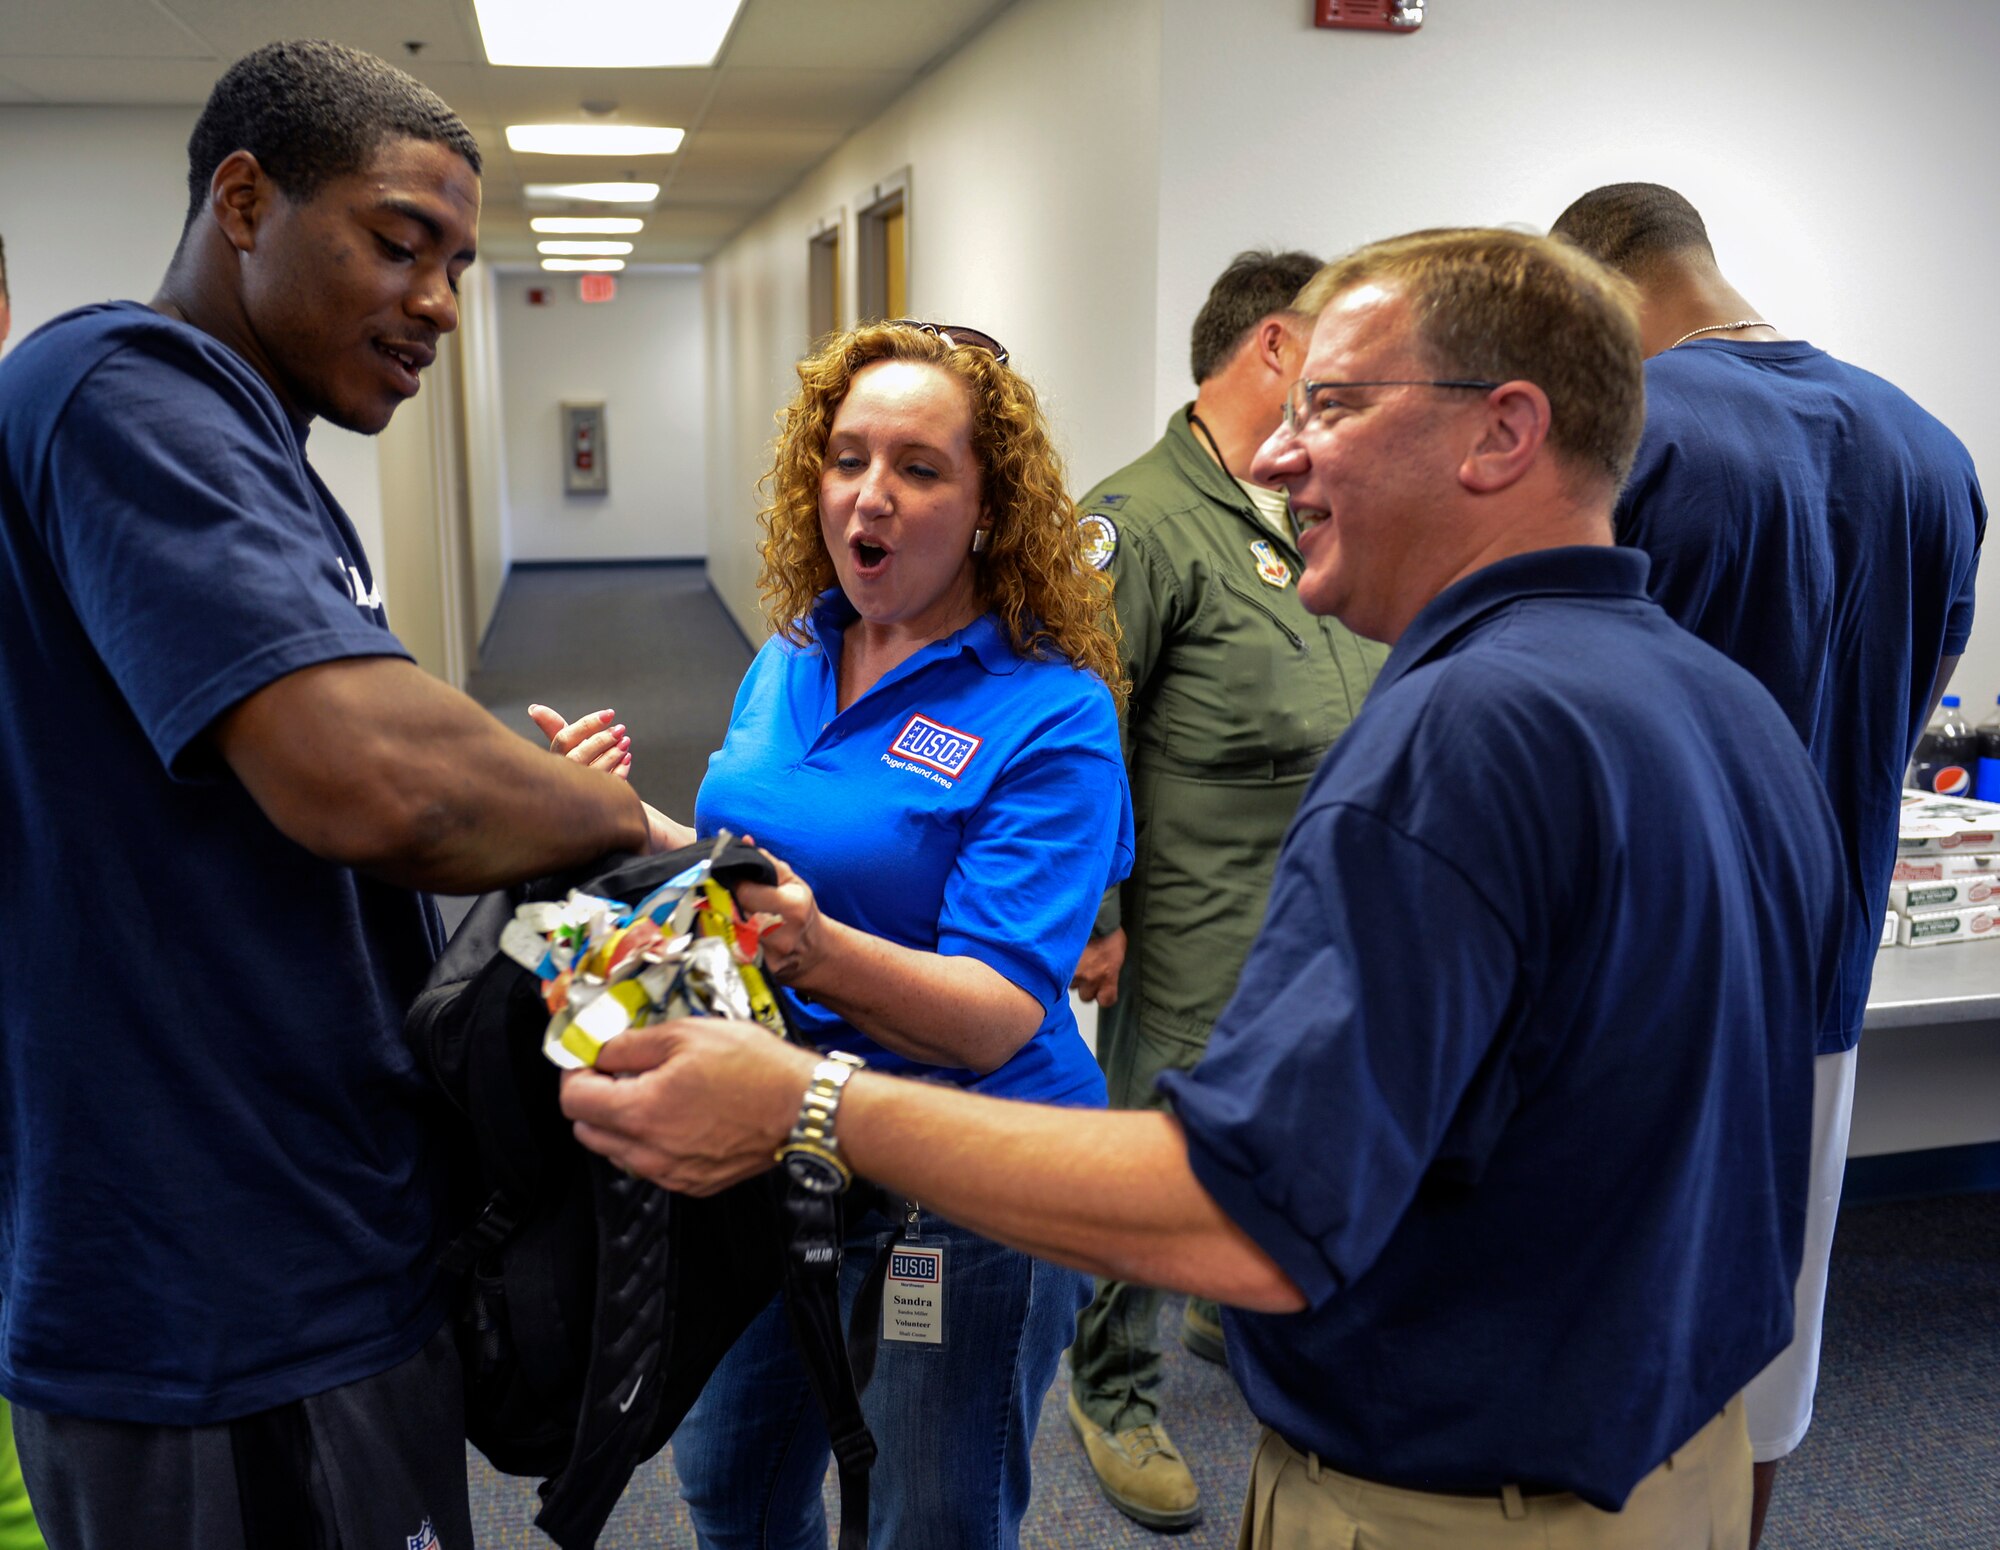 DeShawn Shead (left) Seattle Seahawks cornerback, shows Sandra Miller, USO volunteer and Andrew Oczkewicz (right), USO NW Shali center manager, his bag with airport luggage tags to every city where he has played a game for the Seahawks July 1, 2014, during the 2014 Seattle Seahawks 12 Tour at Joint Base Lewis-McChord, Wash. Shead is part of the 12 Tour taking the Vince Lombardi Trophy through the Pacific Northwest this summer. (U.S. Air Force photo/Staff Sgt. Russ Jackson)